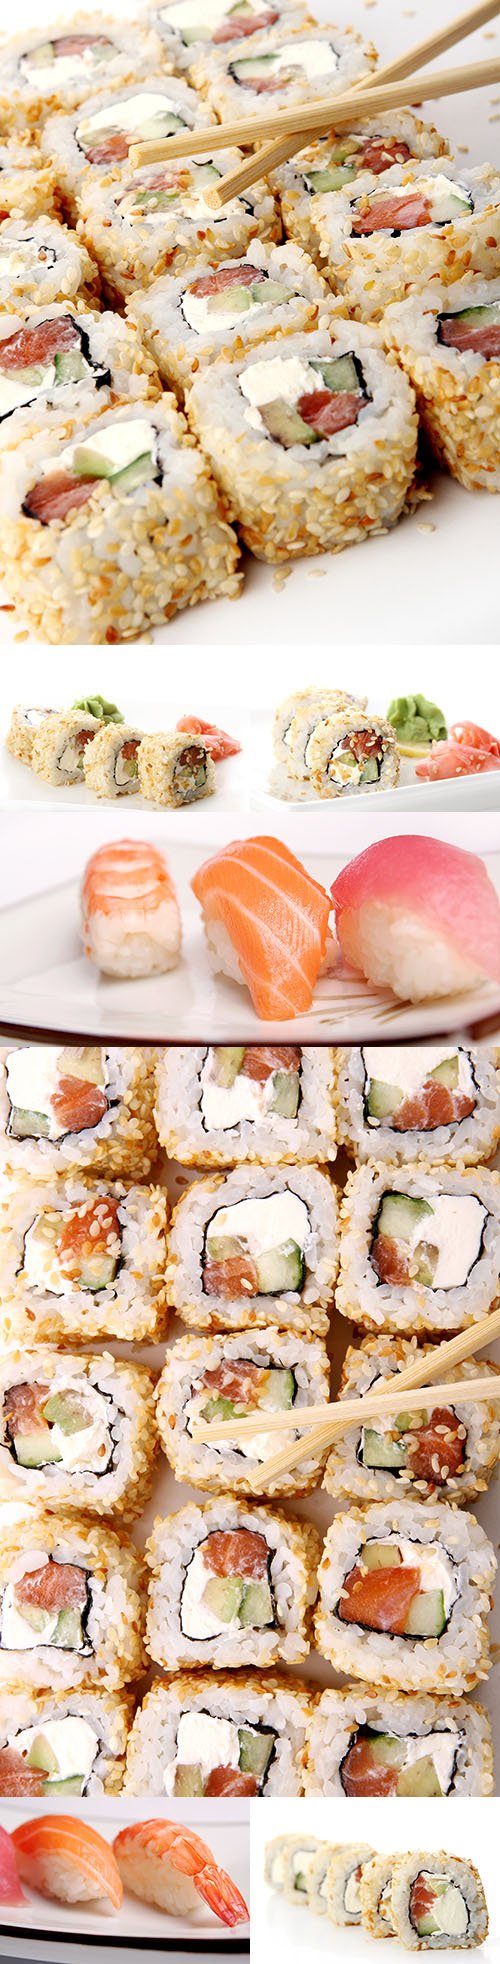 Fresh and delicious sushi rolls Japanese cuisine